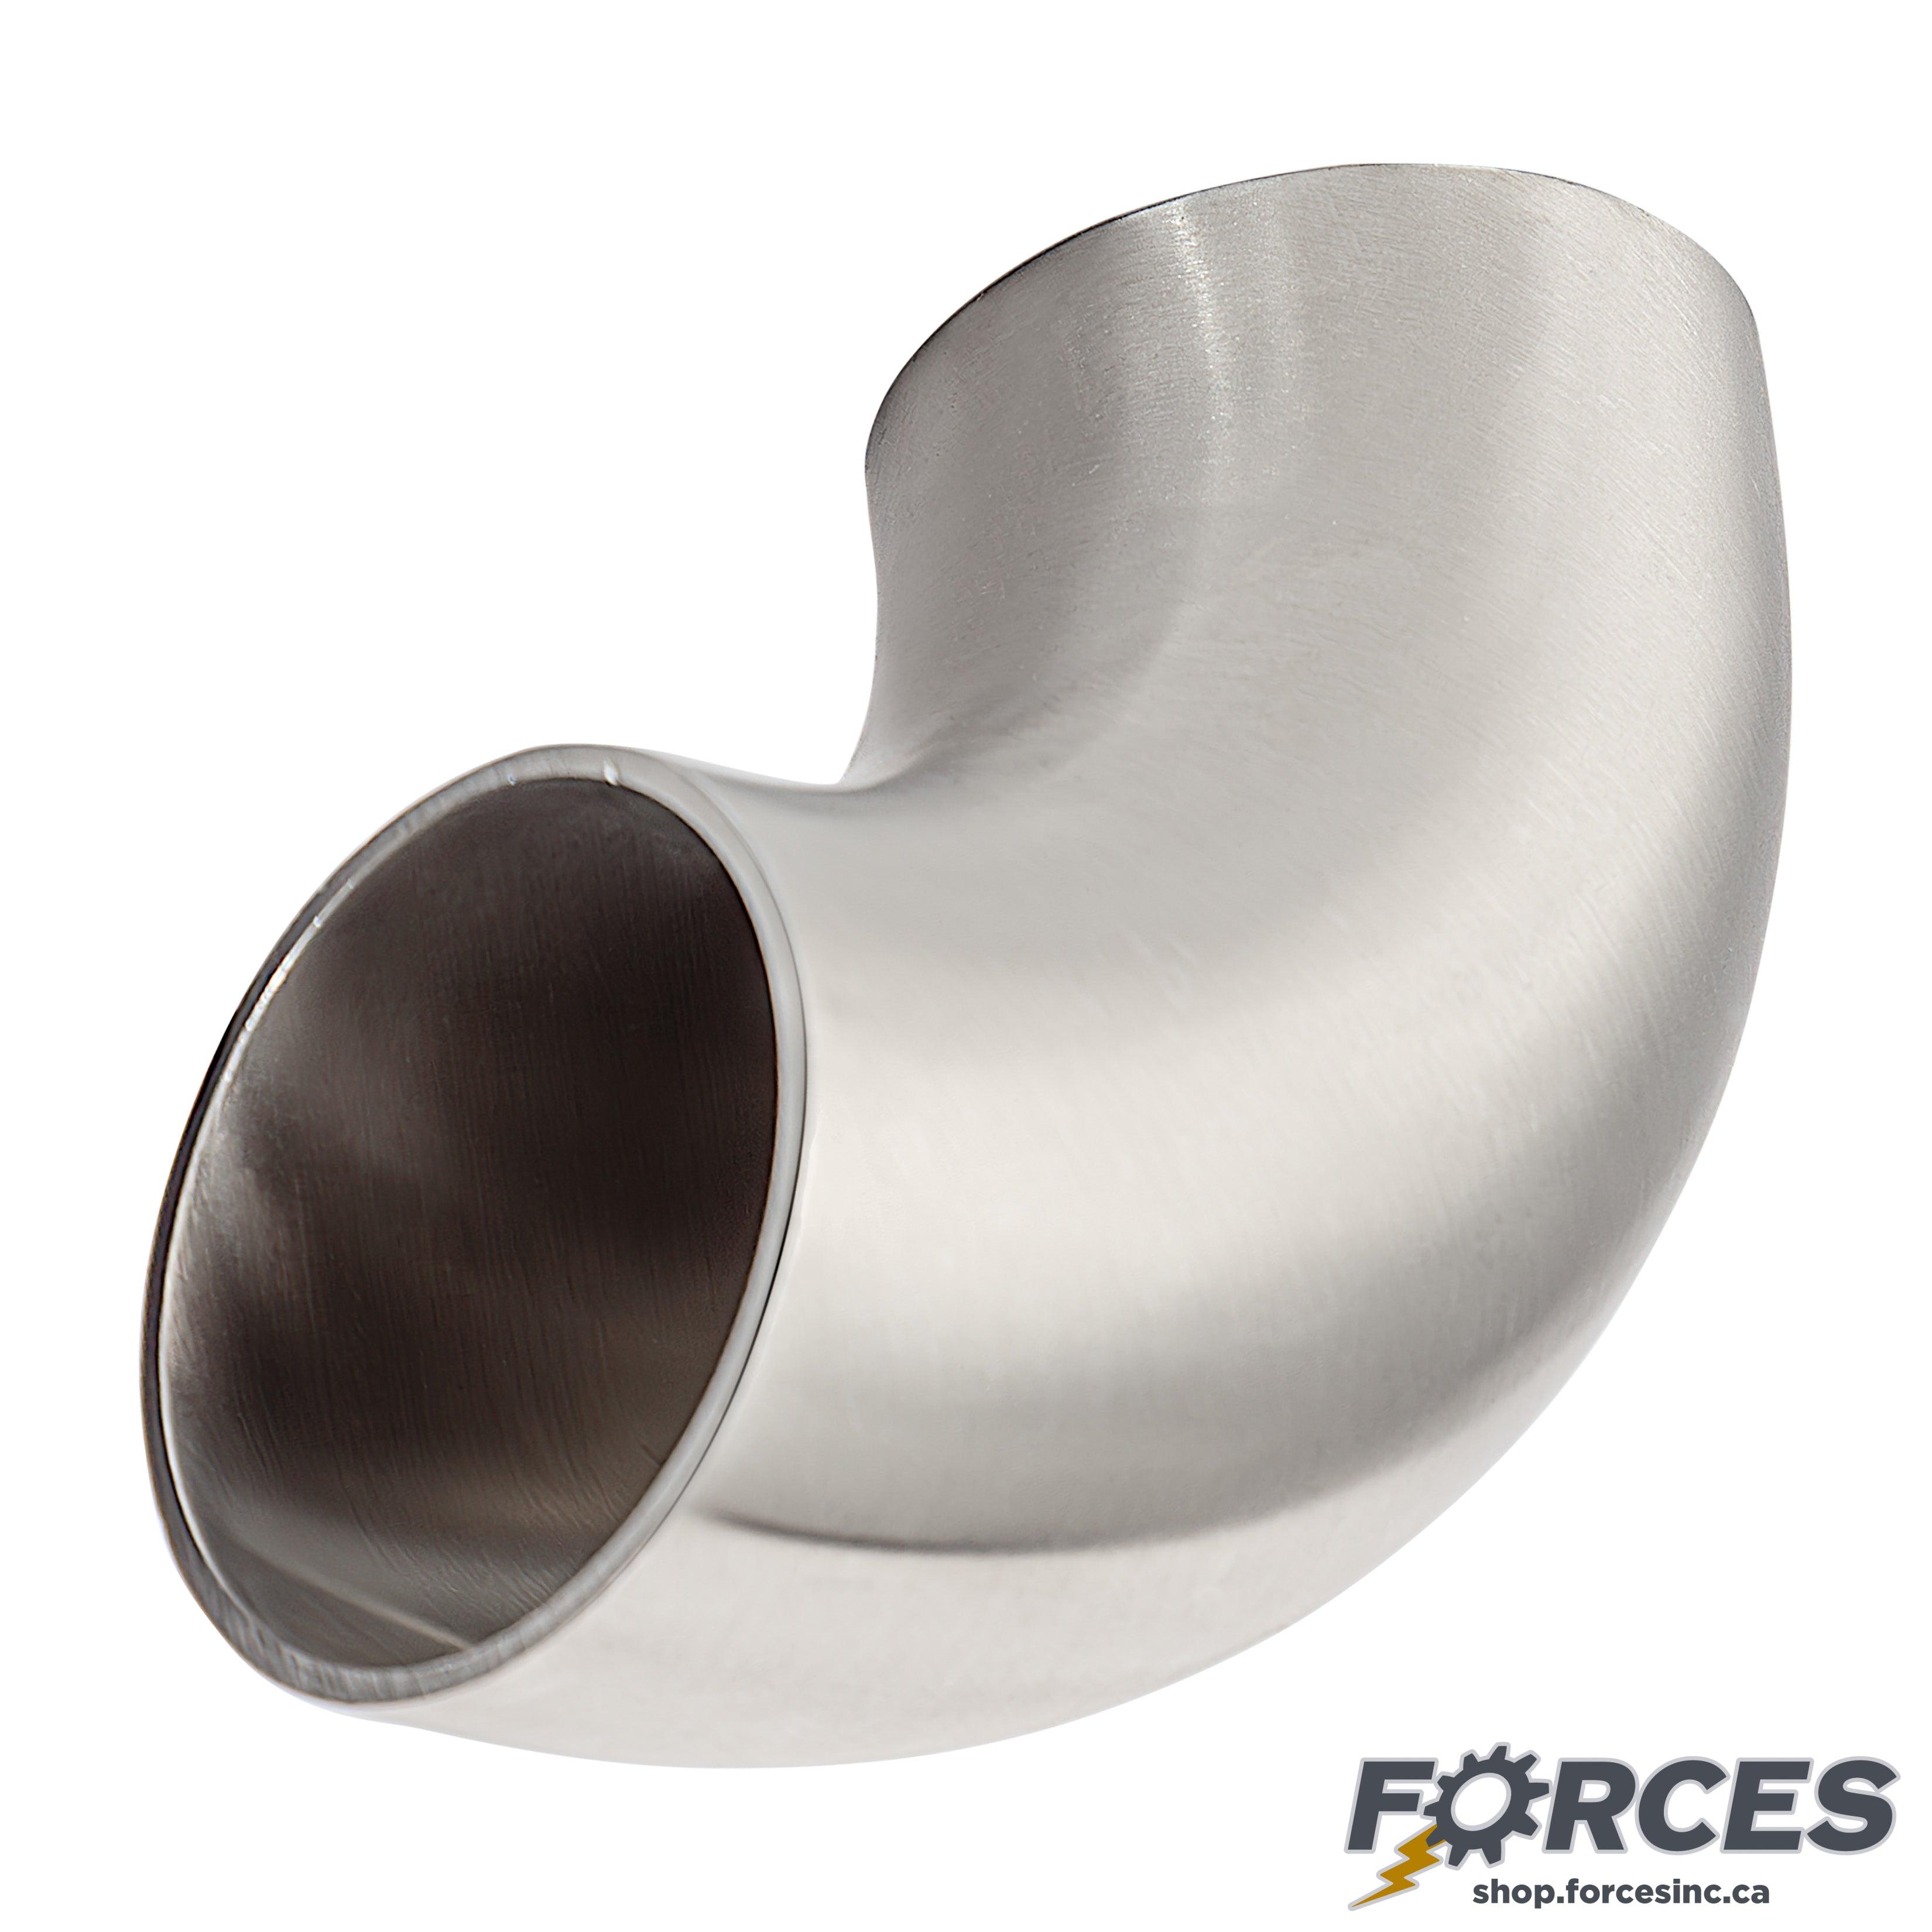 2-1/2" Butt Weld 90° Elbow - Stainless Steel 316 - Forces Inc